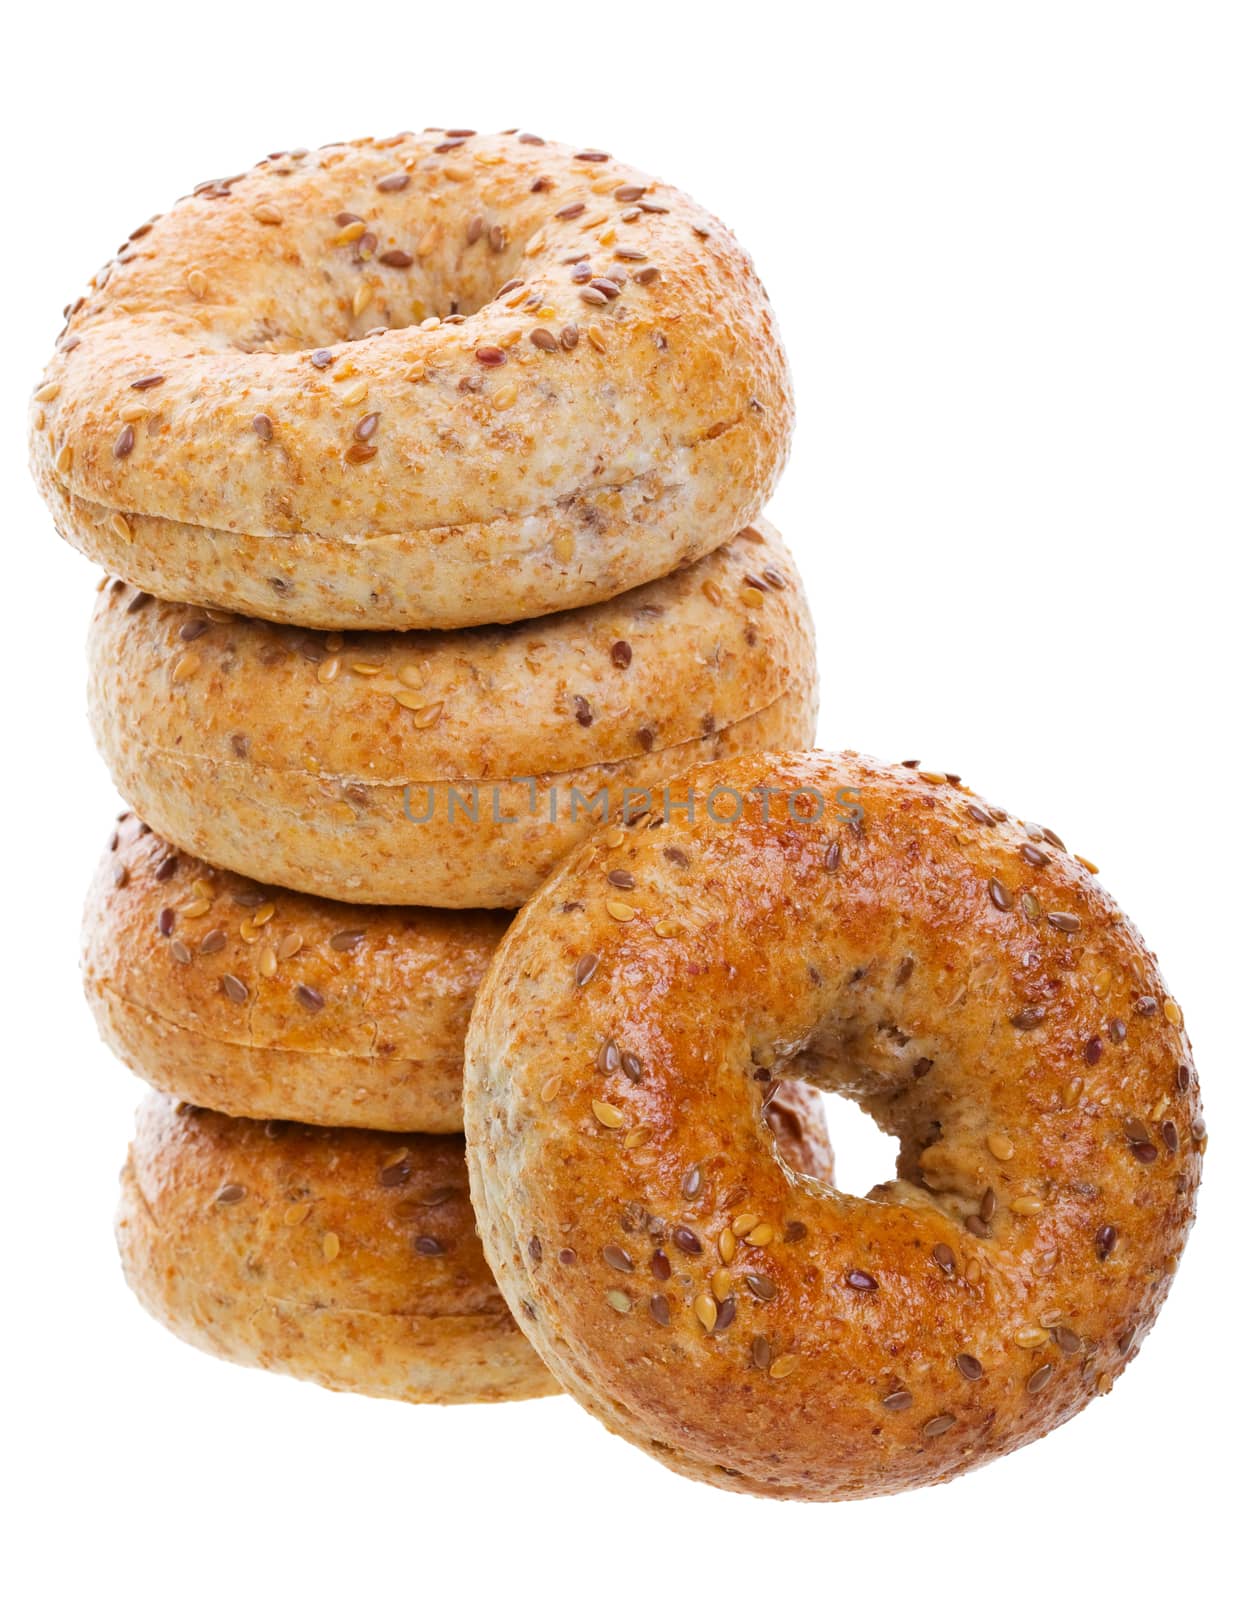 A stack of golden brown, multi-grain bagels.  Shot on white background.